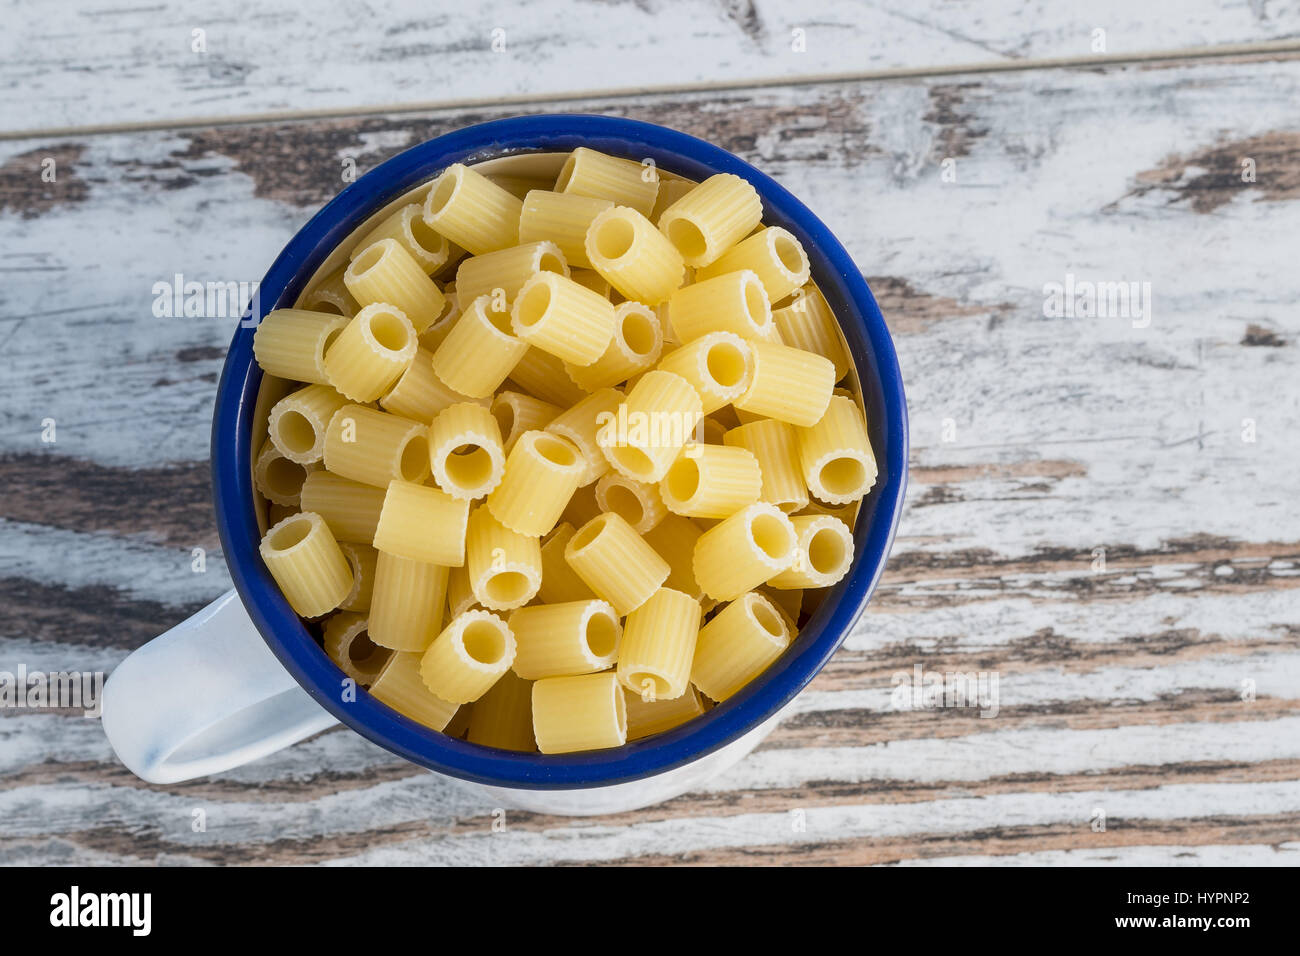 dried pasta in cup metallic fingering Angle Stock Photo